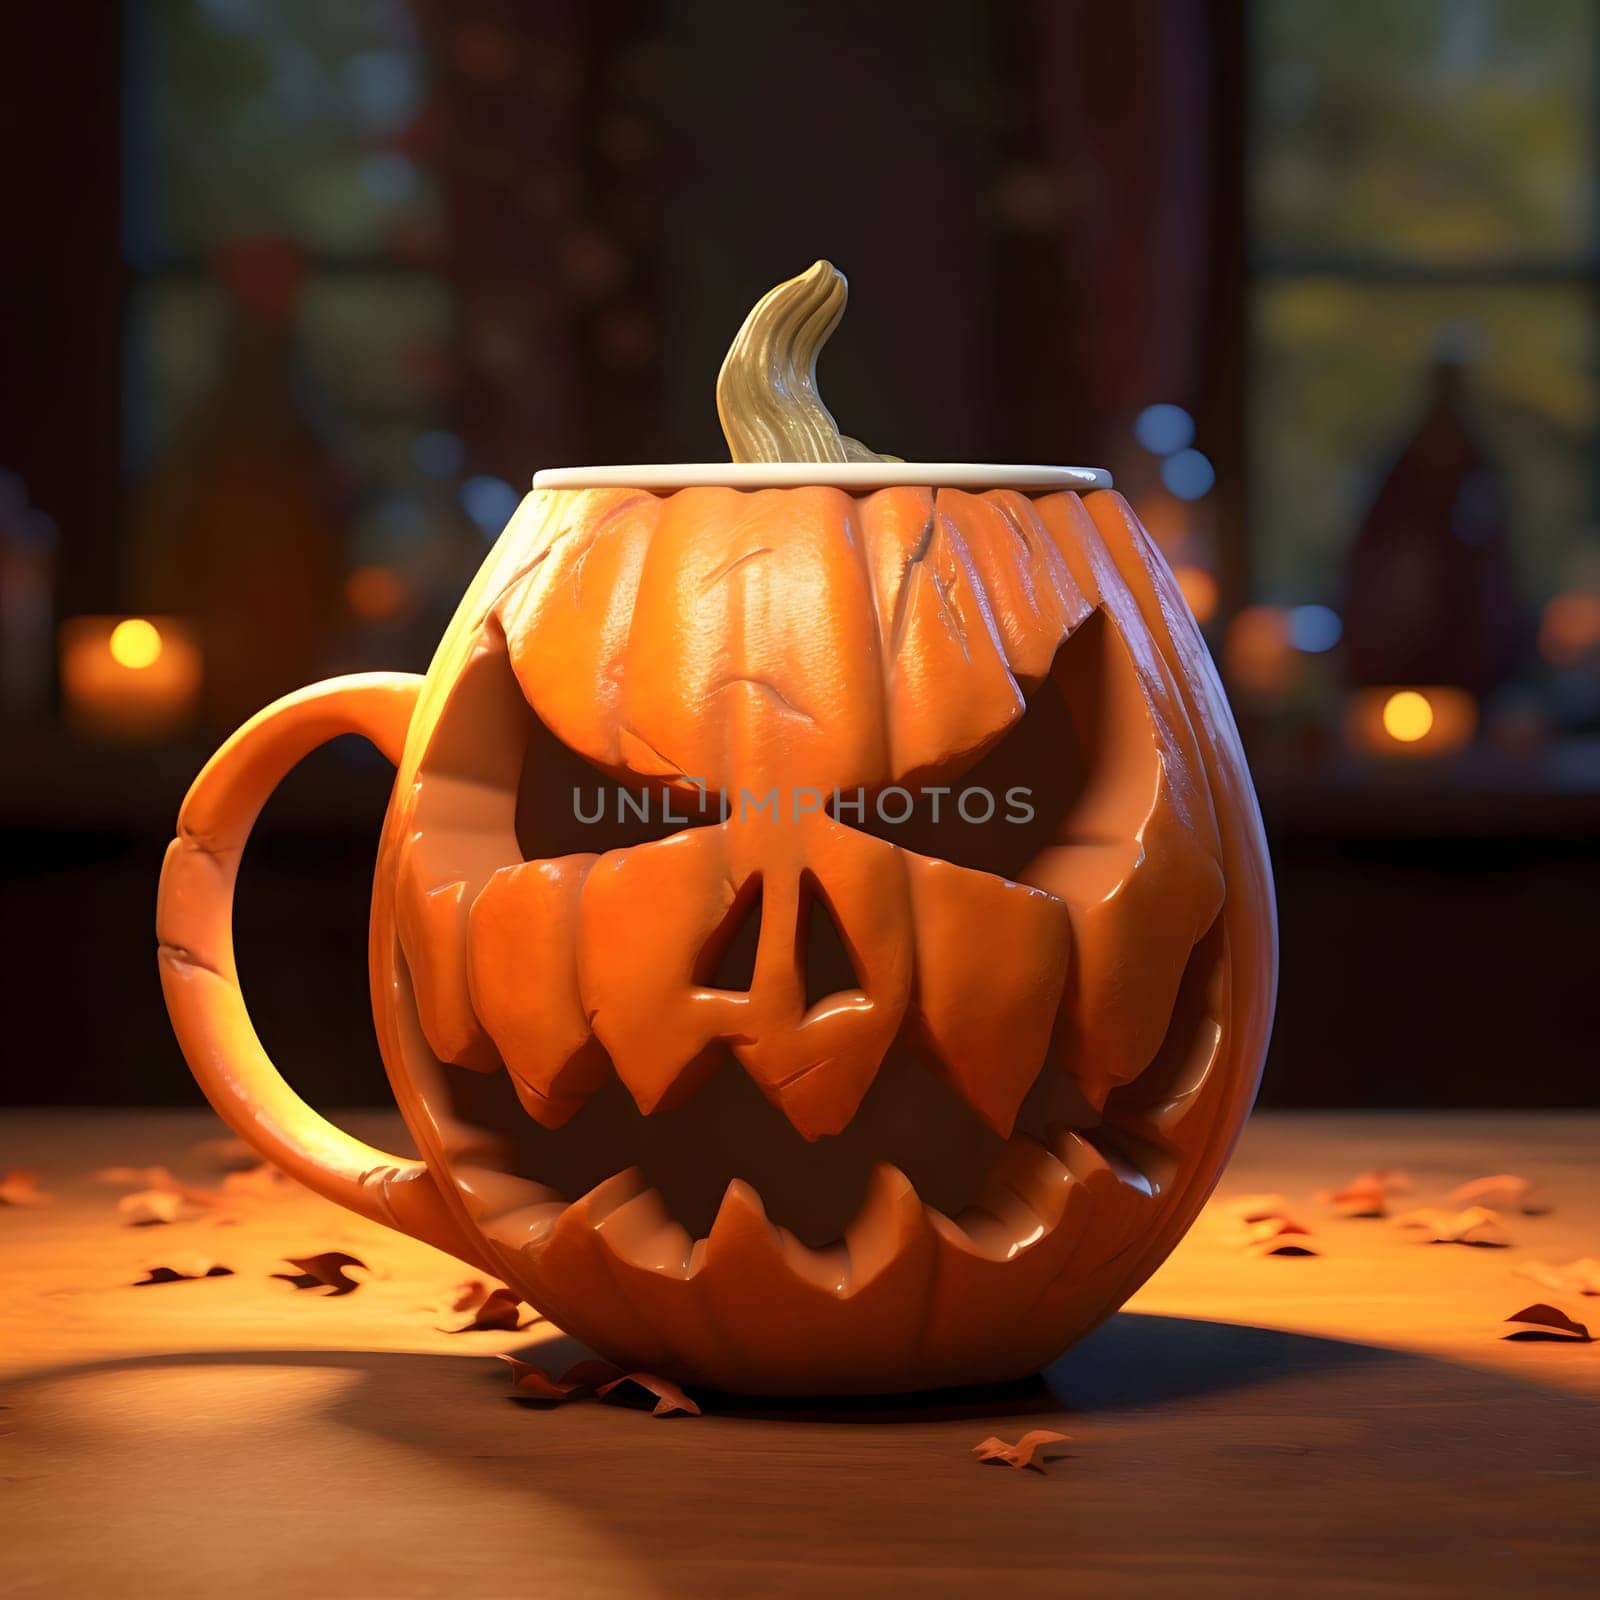 Carved from a pumpkin jack-o-lantern mug, a Halloween image. Atmosphere of darkness and fear.